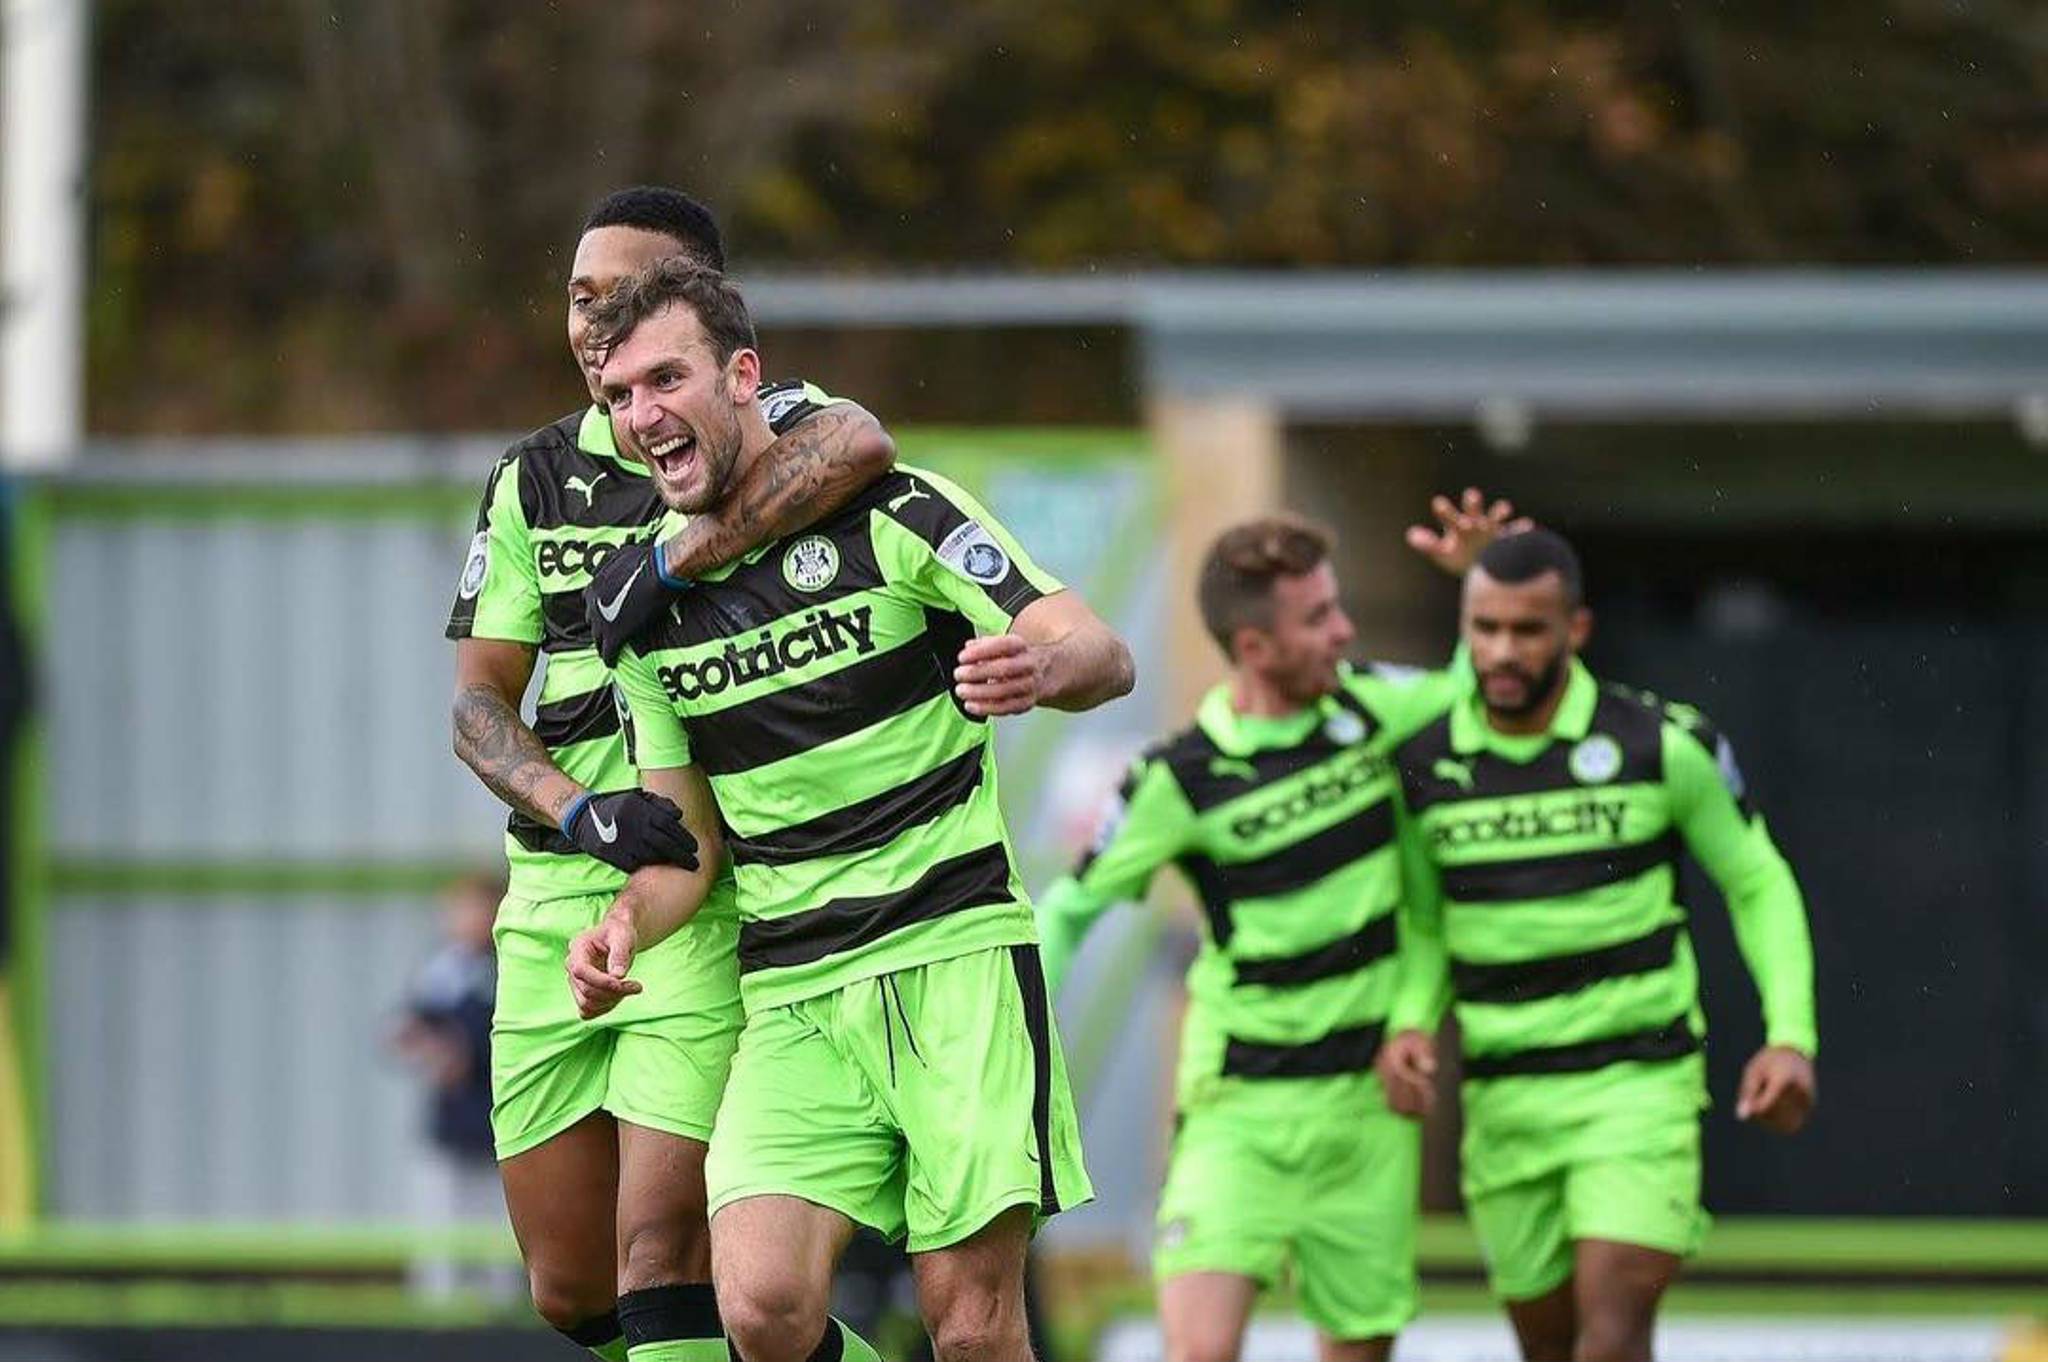 Forest Green Rovers is a vegan football team